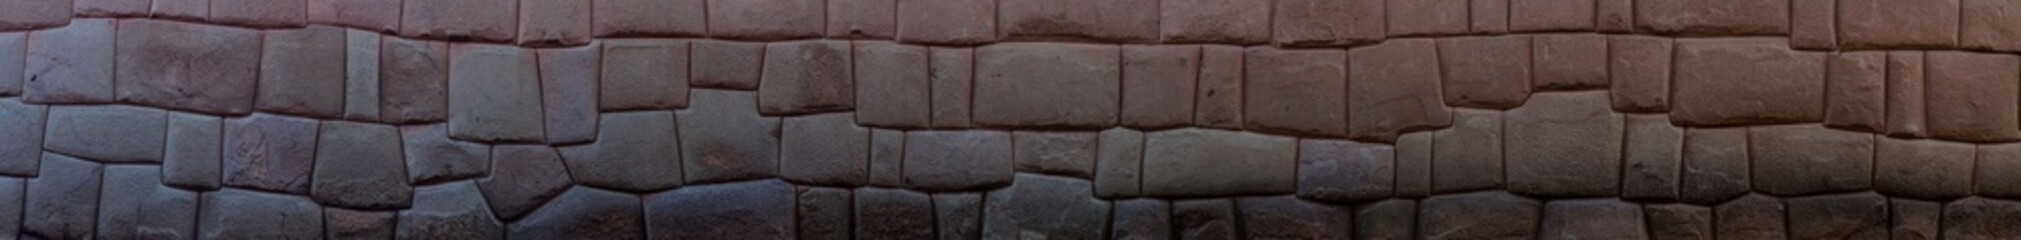 Detail of Inca's perfect stonework. Wall of former palace of Inca Roca in Cuzco, Peru.